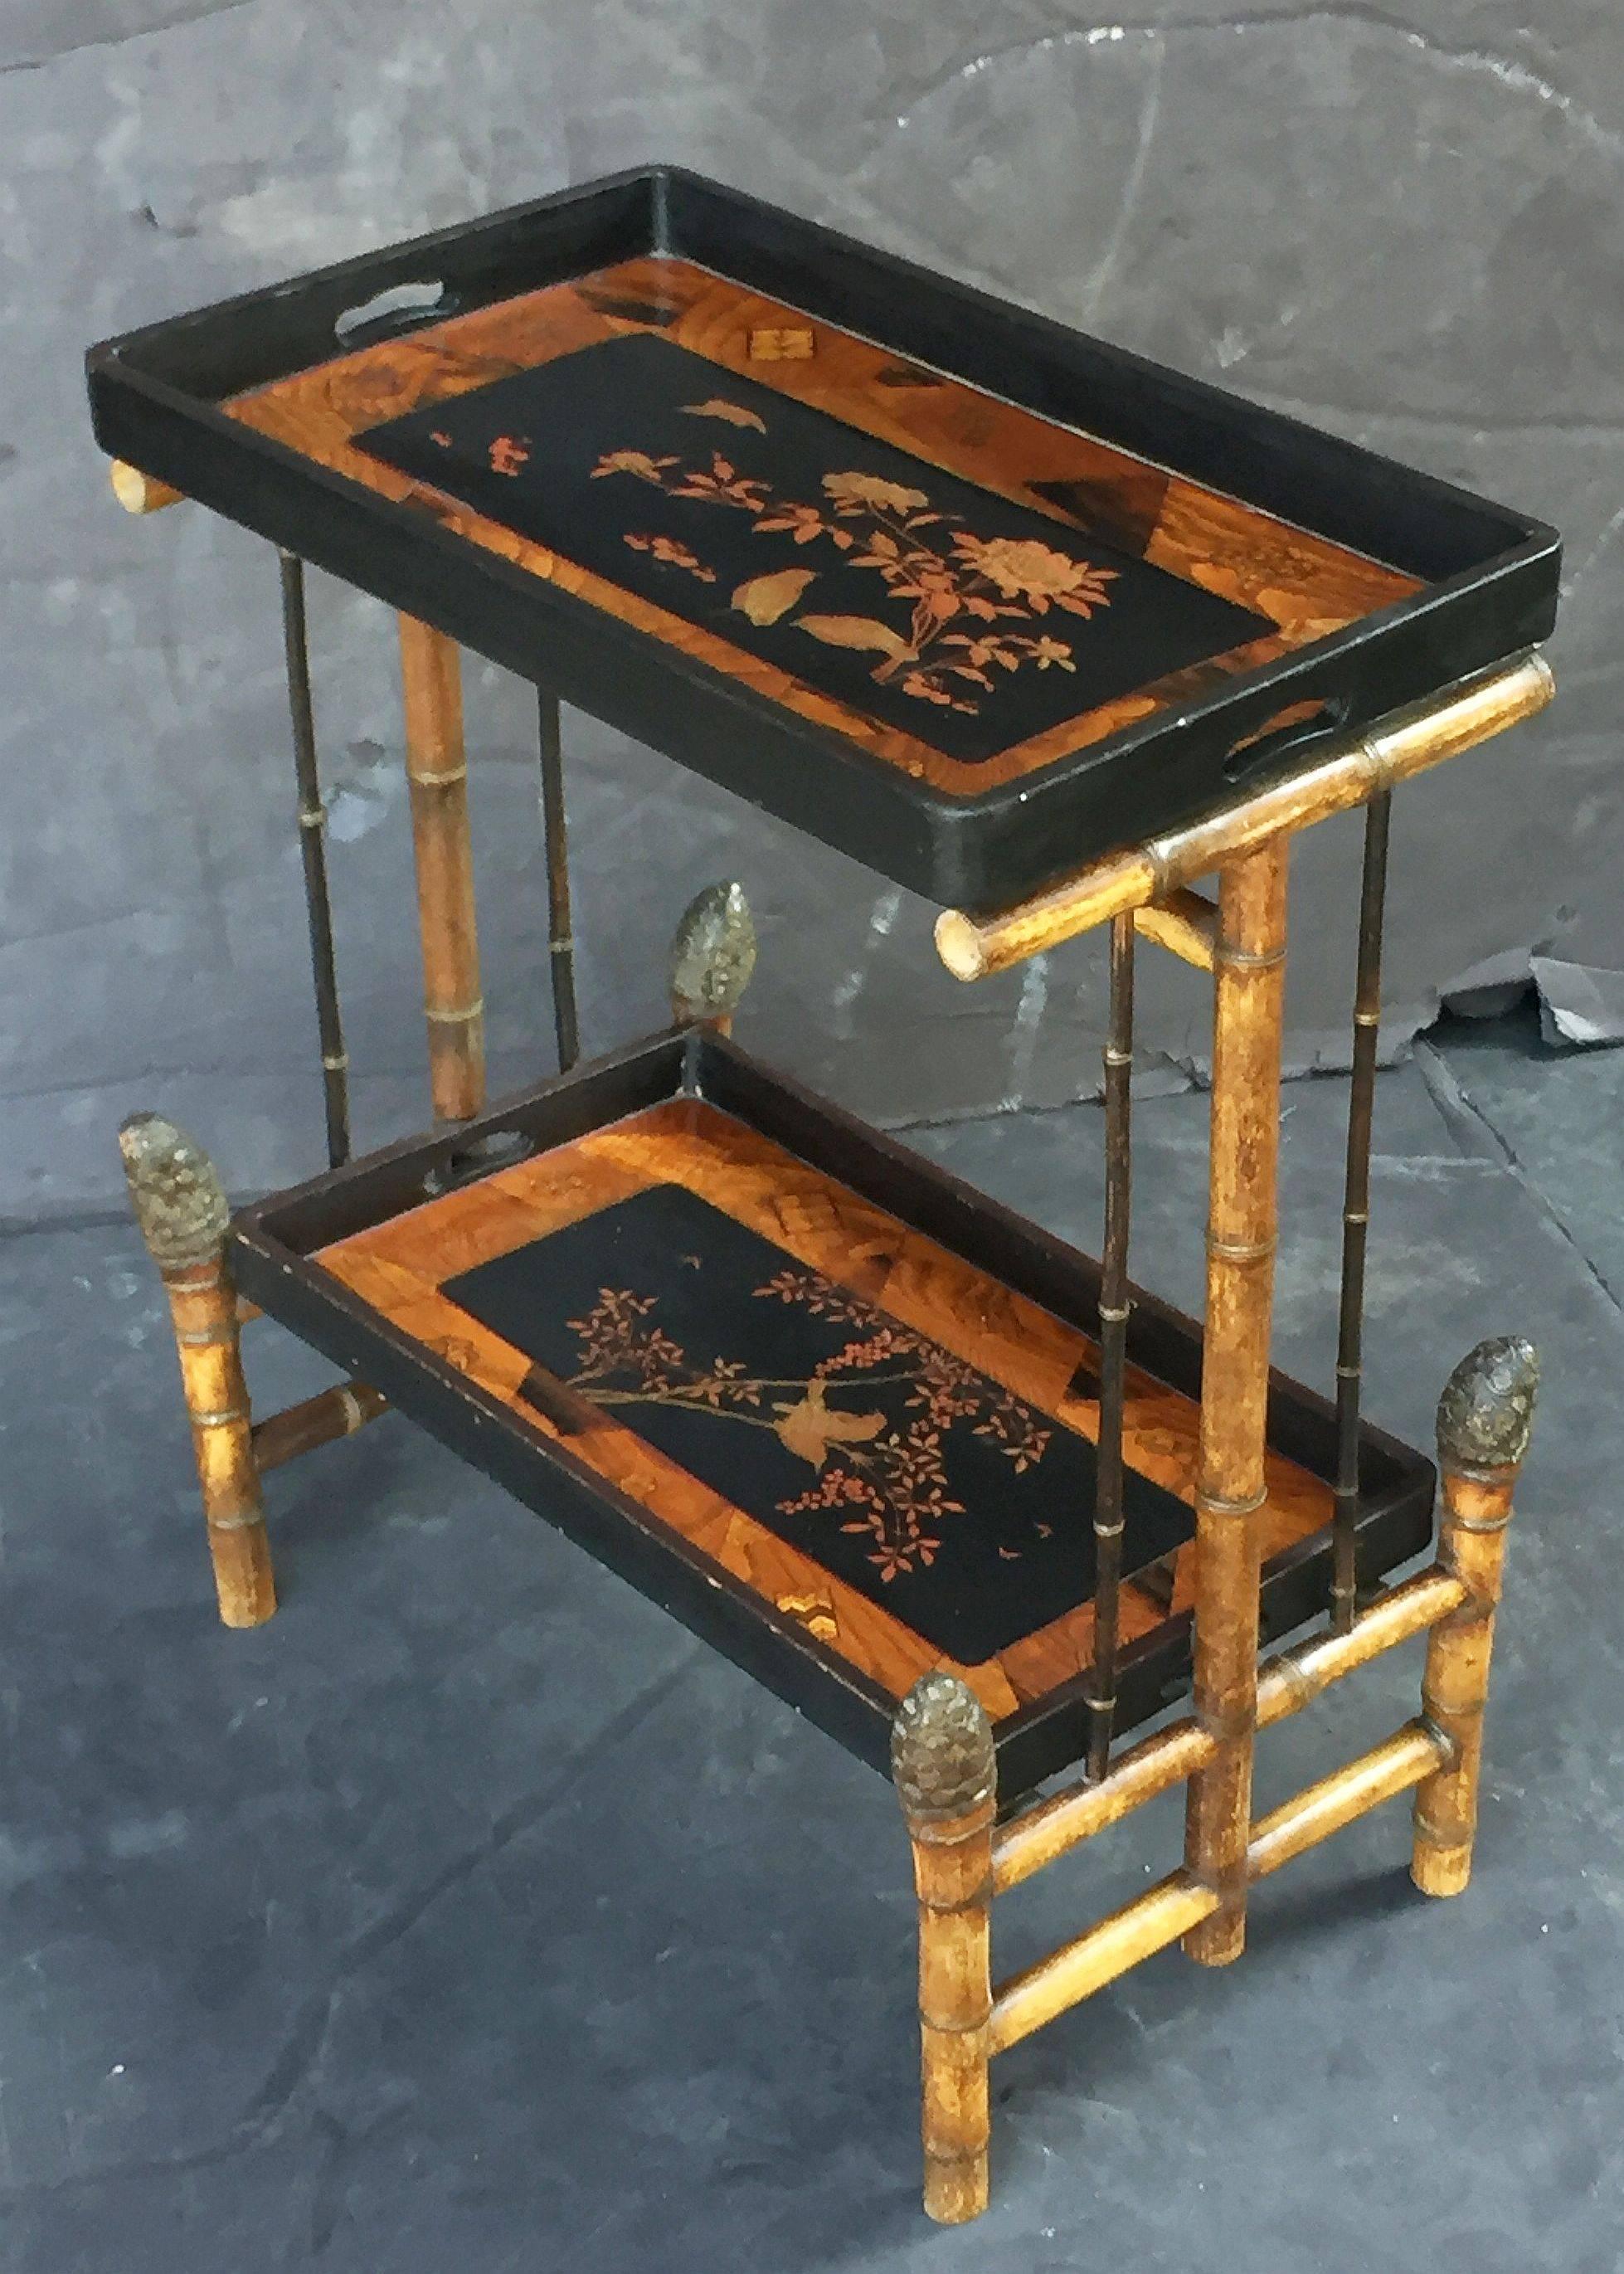 A fine English bamboo rectangular tray table featuring two tiers of ebonized and lacquered panel trays, each tray with marquetry accents around a chinoiserie design in the center, mounted to a stylish frame of bamboo, with bamboo root foot finials